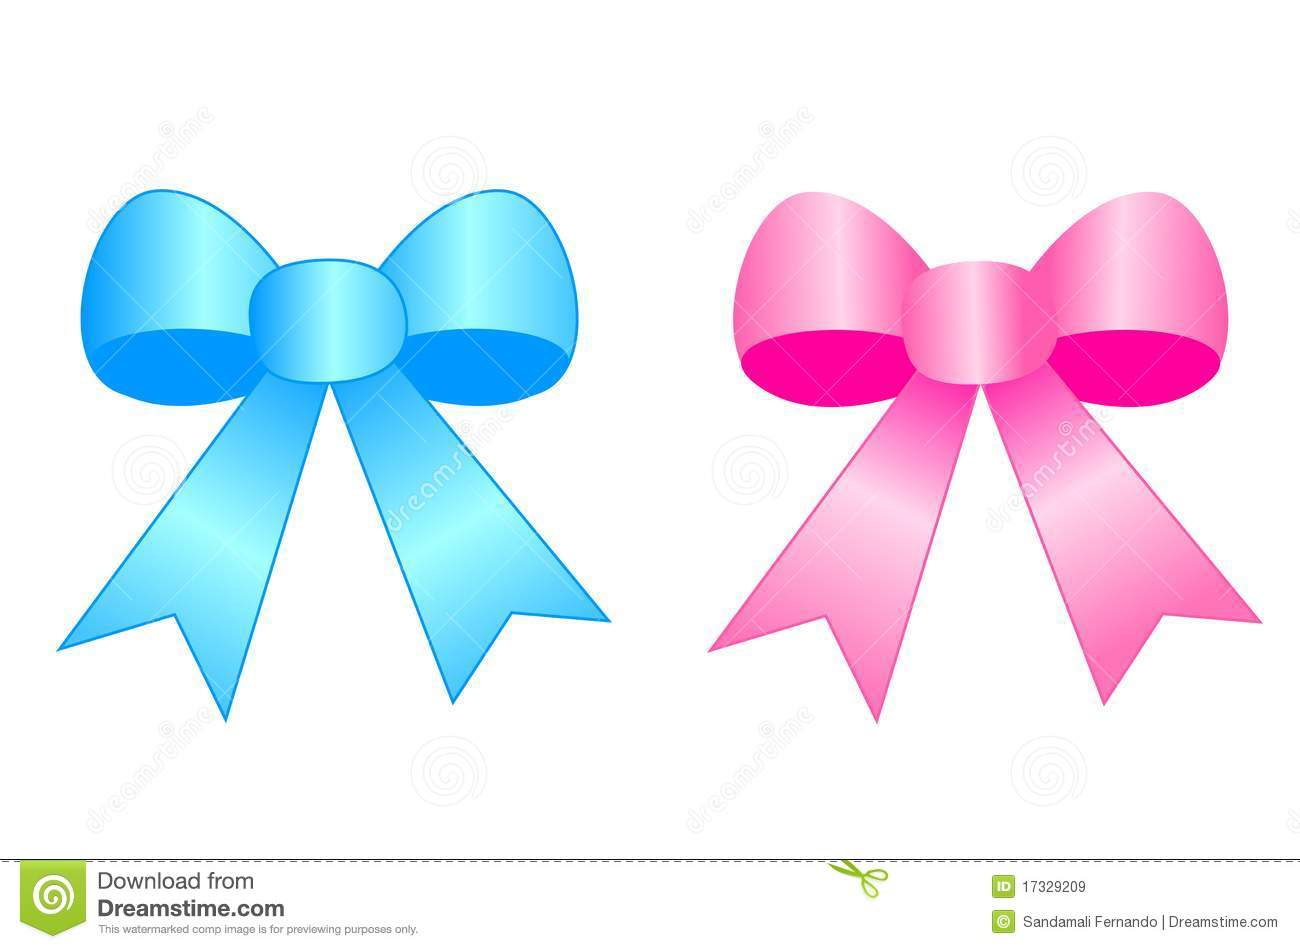 Bow   Bows Royalty Free Stock Images   Image  17329209